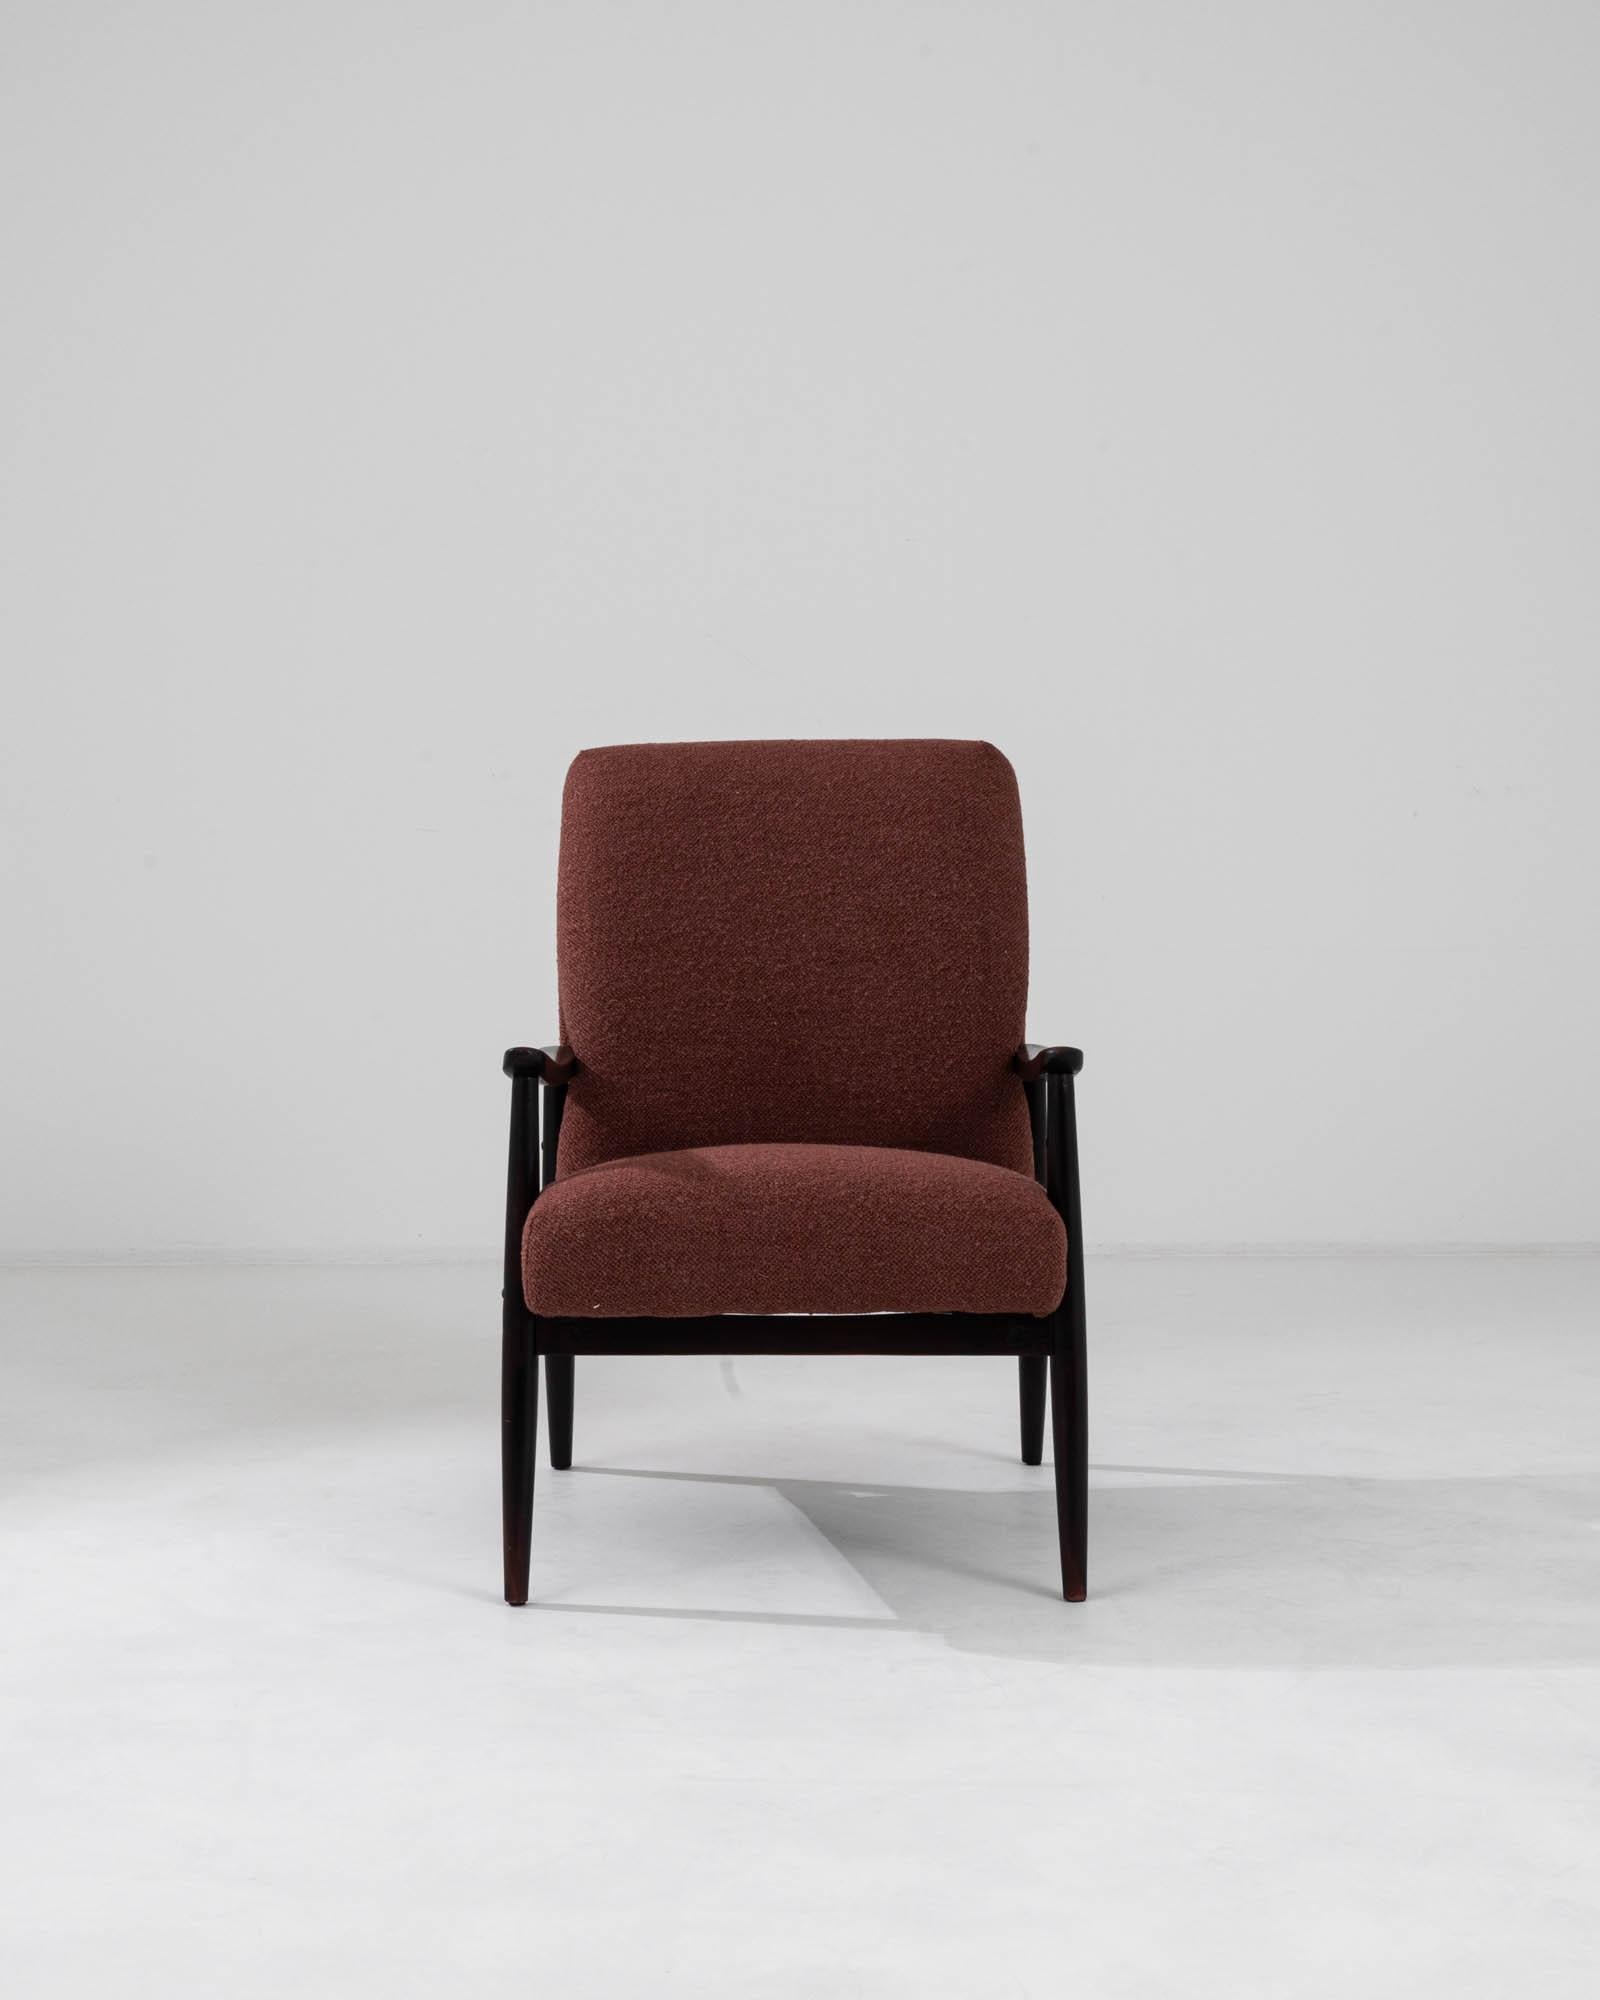 This upholstered armchair was produced in Czechia, circa 1960. Upholstered with a garnet fabric, the slight recline and cushioned seat make for a comfortable posture. Contrasting with the angular dark frame, the plush seat creates a subdued